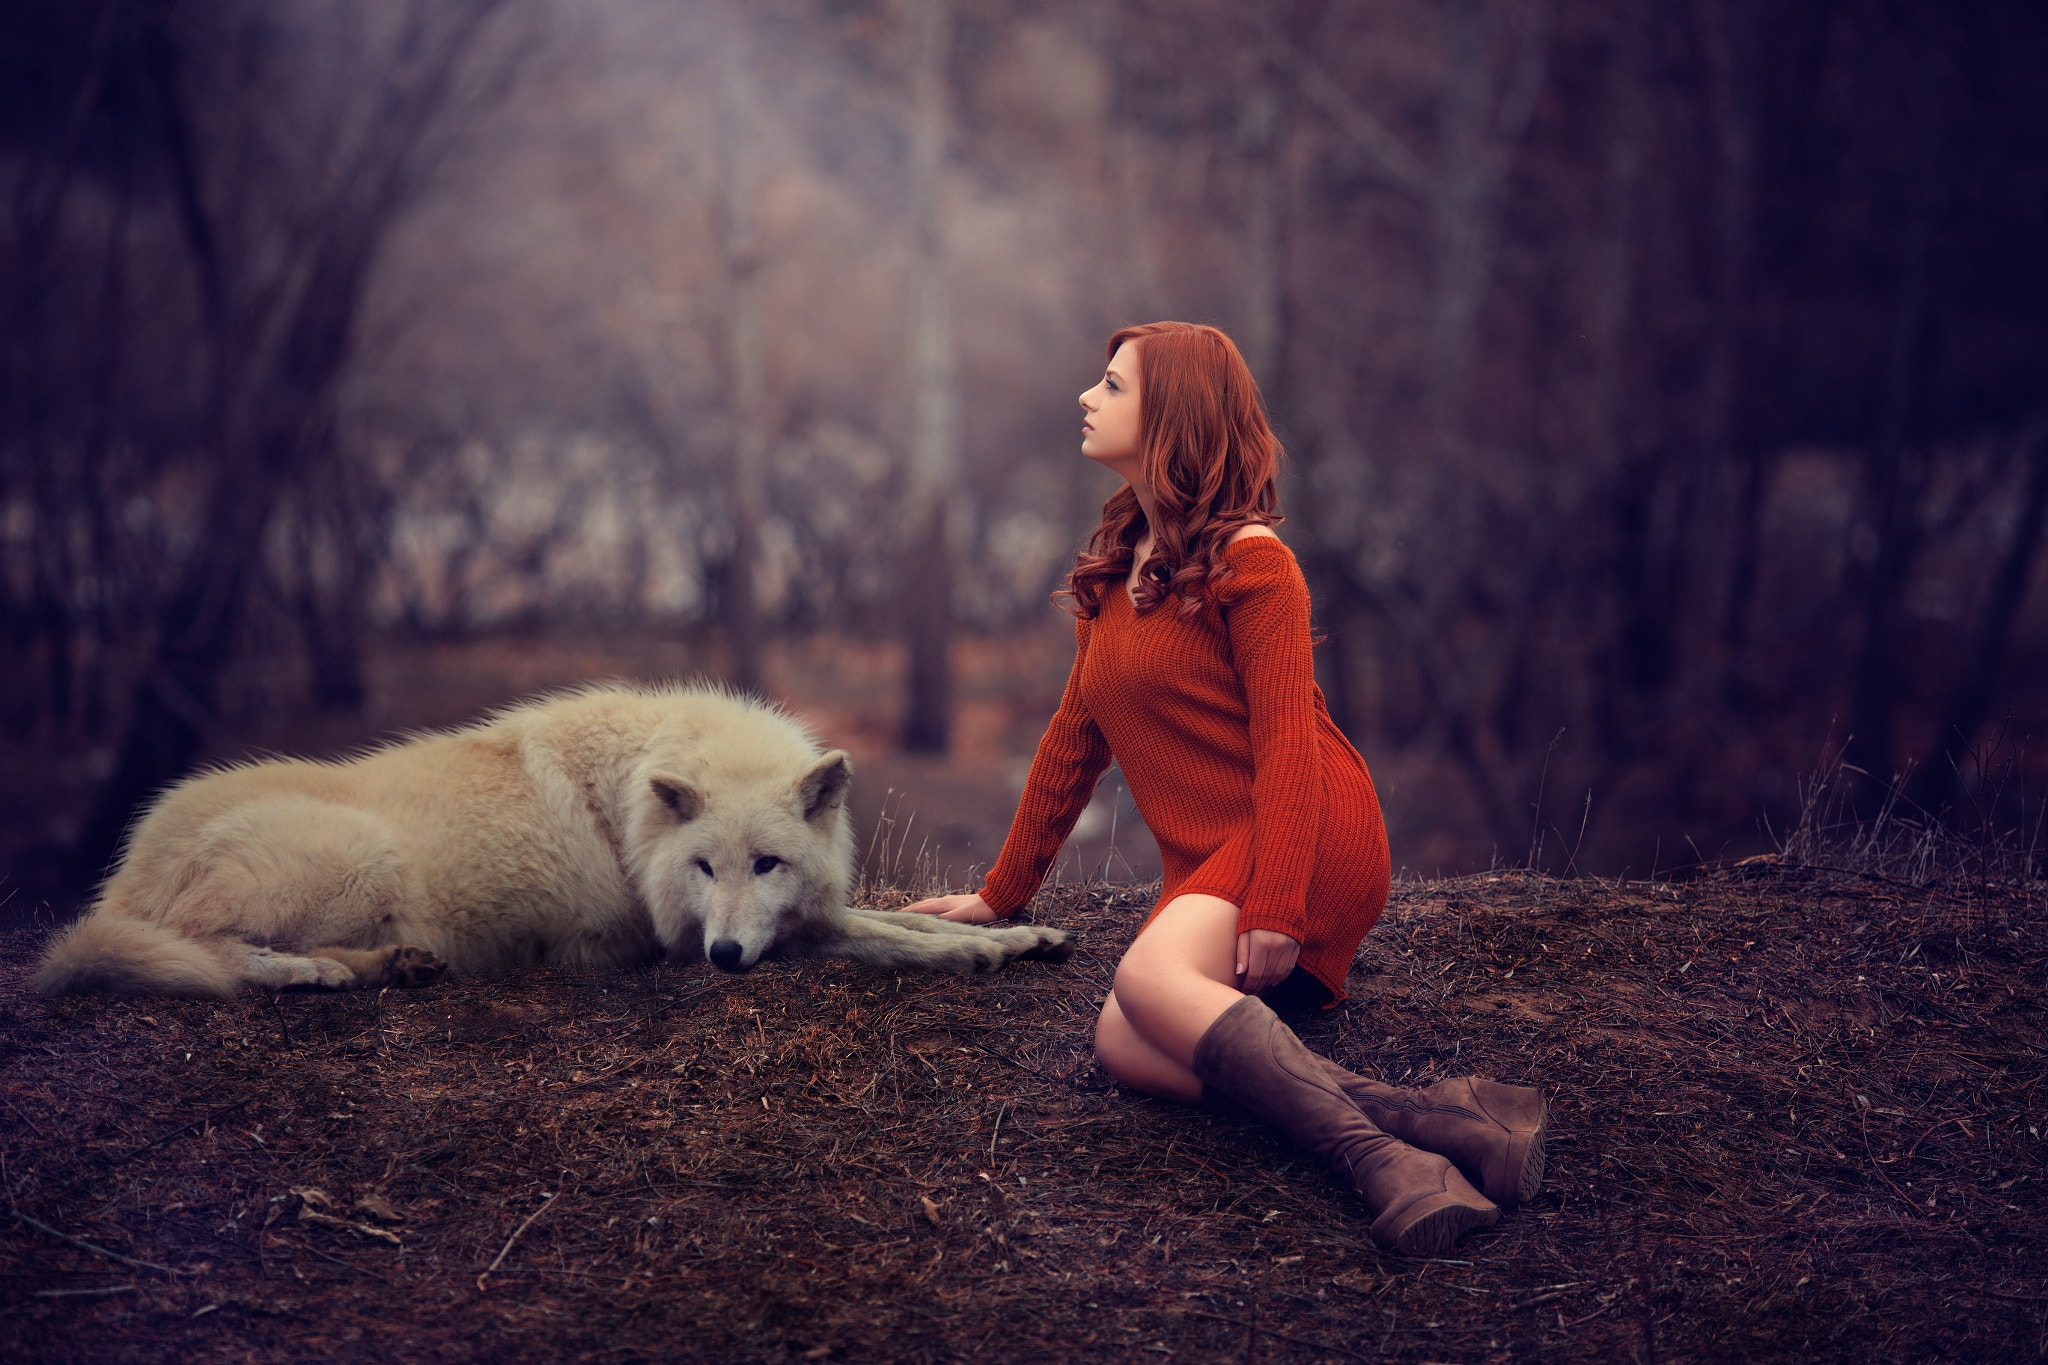 People 2048x1365 women animals wolf redhead women outdoors photoshopped forest